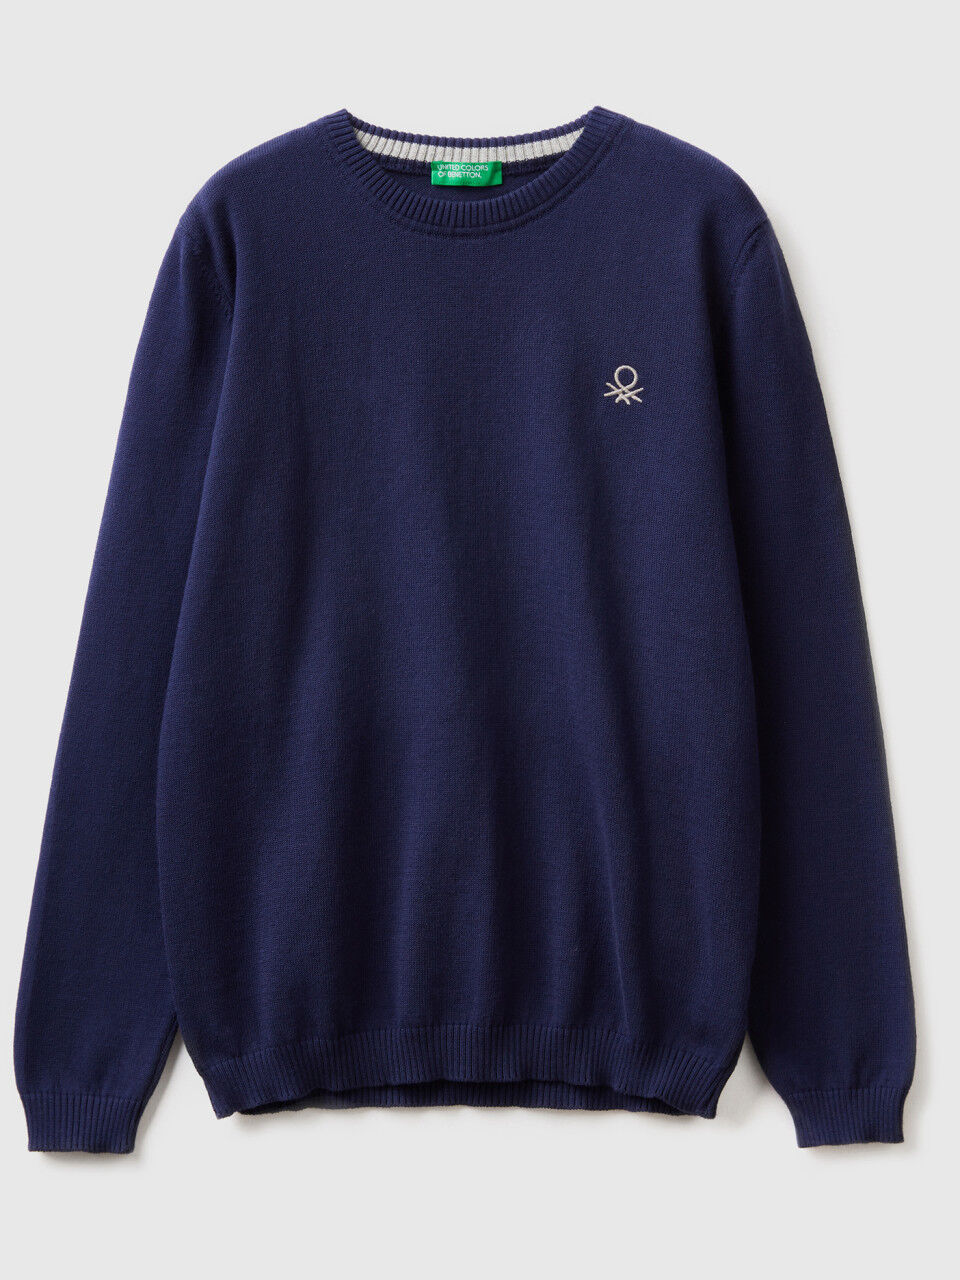 Sweater in pure cotton with logo